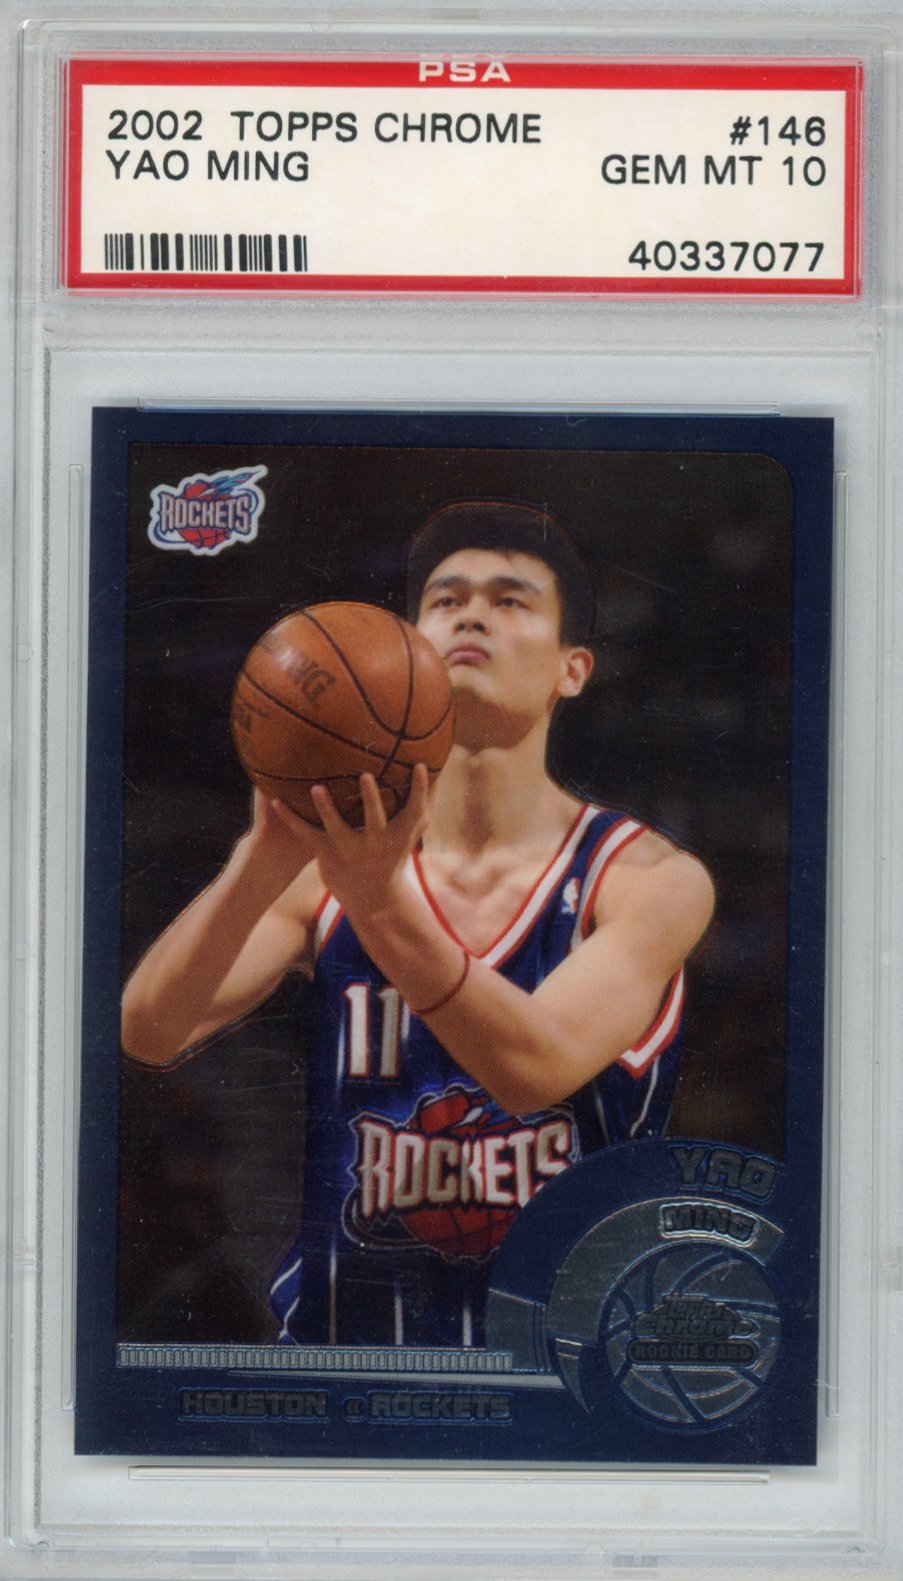 Yao Ming 2002 Topps Chrome Base #146 Price Guide - Sports Card Investor